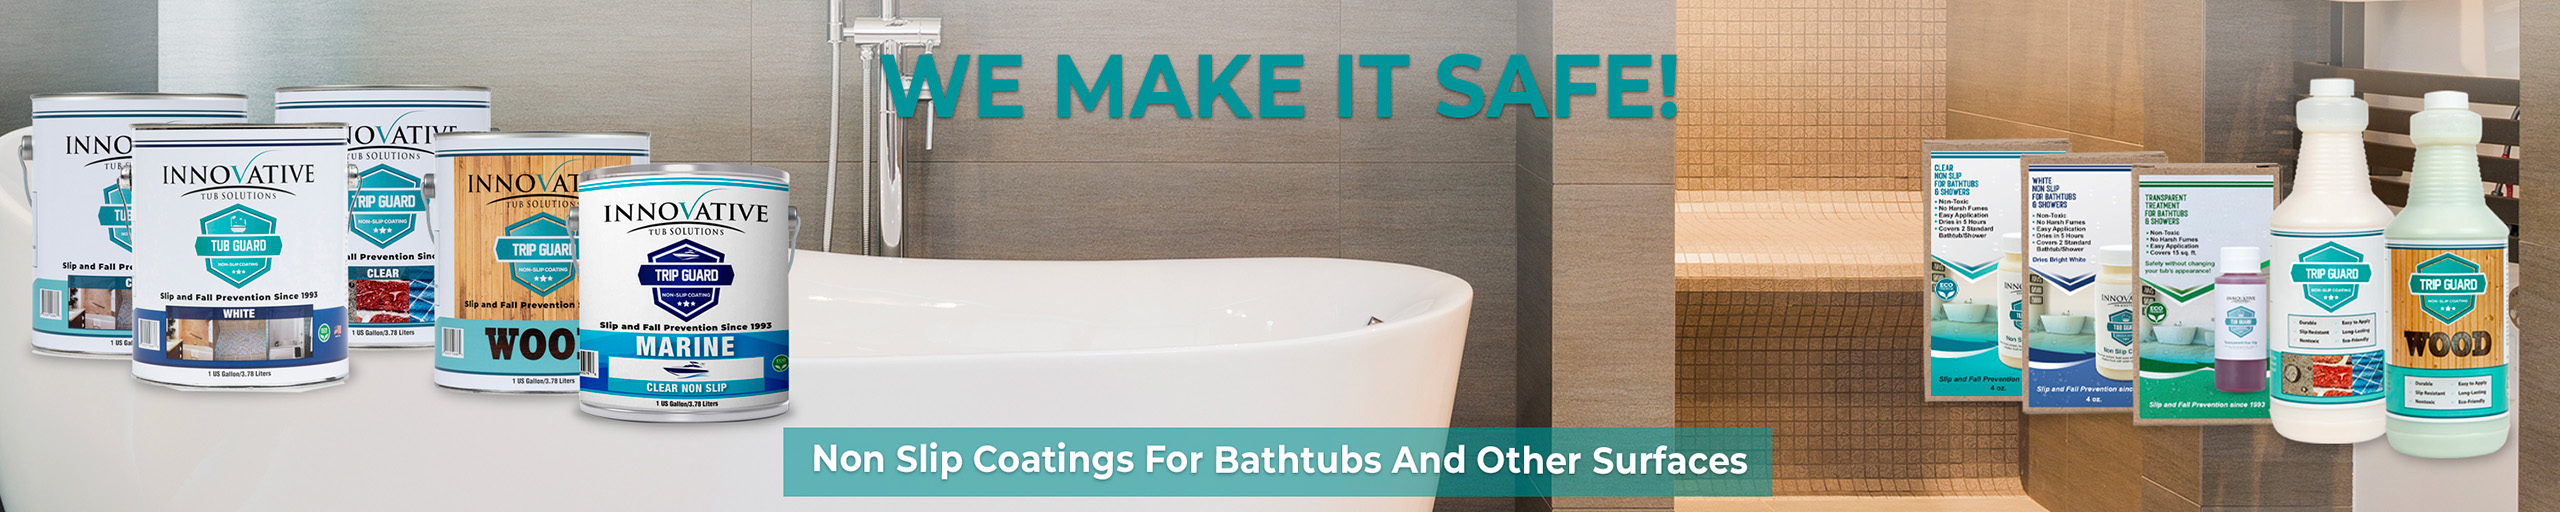 Innovative Tub Solutions - Non Slip Coatings for Bathtubs and Other Surfaces